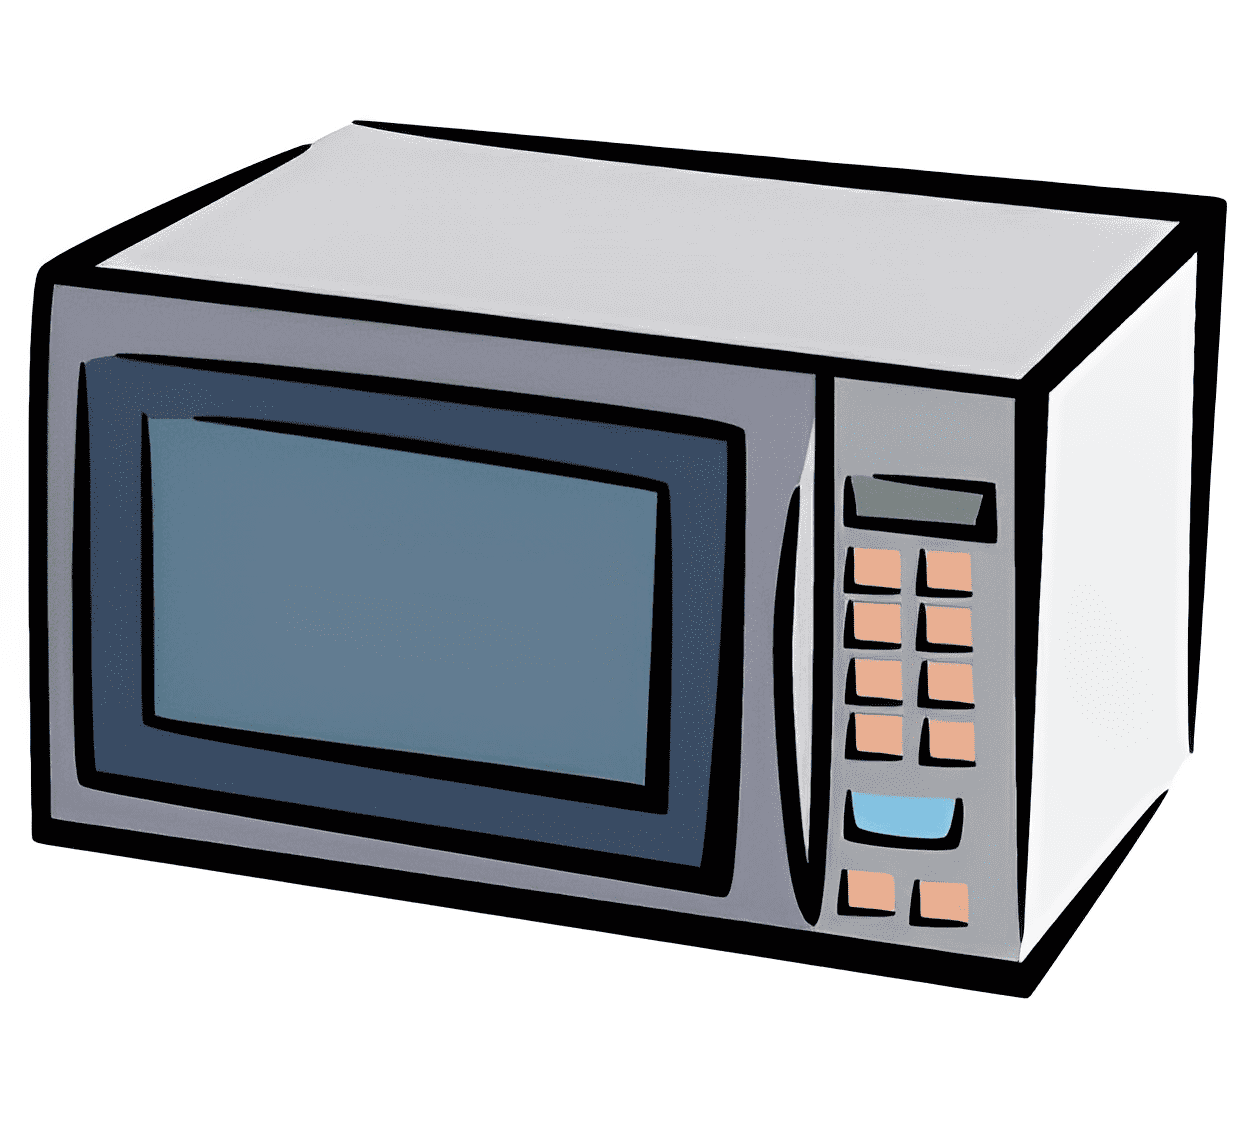 Microwave Clipart Image